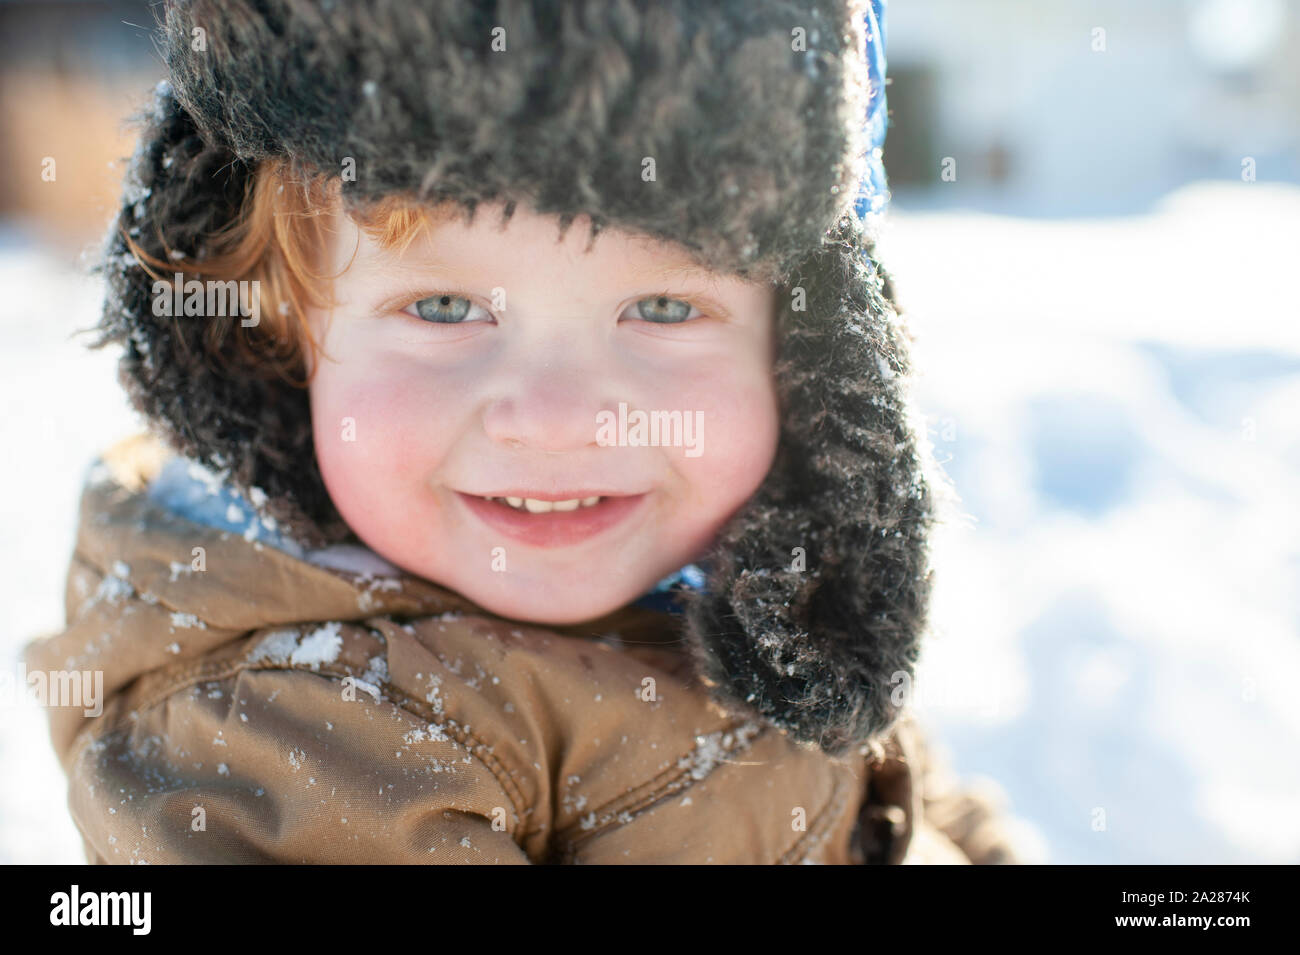 Up close of cute toddler in winter clothes and hat smiling in the snow Stock Photo